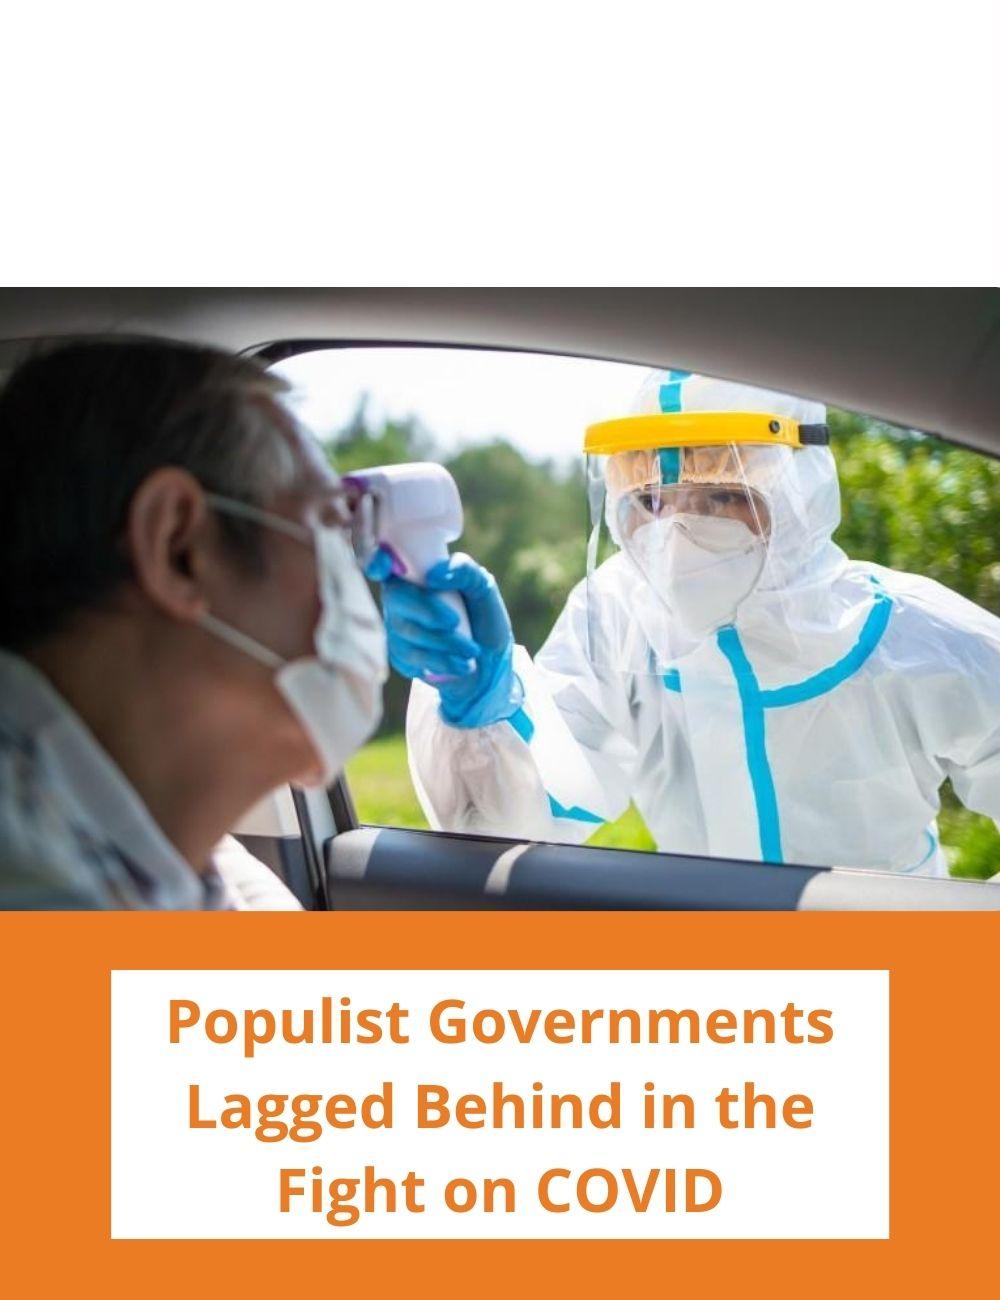 Image: a man in in protective gear takes the temperature of a man wearing a surgical mask inside a car. Link to related stories. Story headline: Populist governments lagged behind in the fight on COVID.